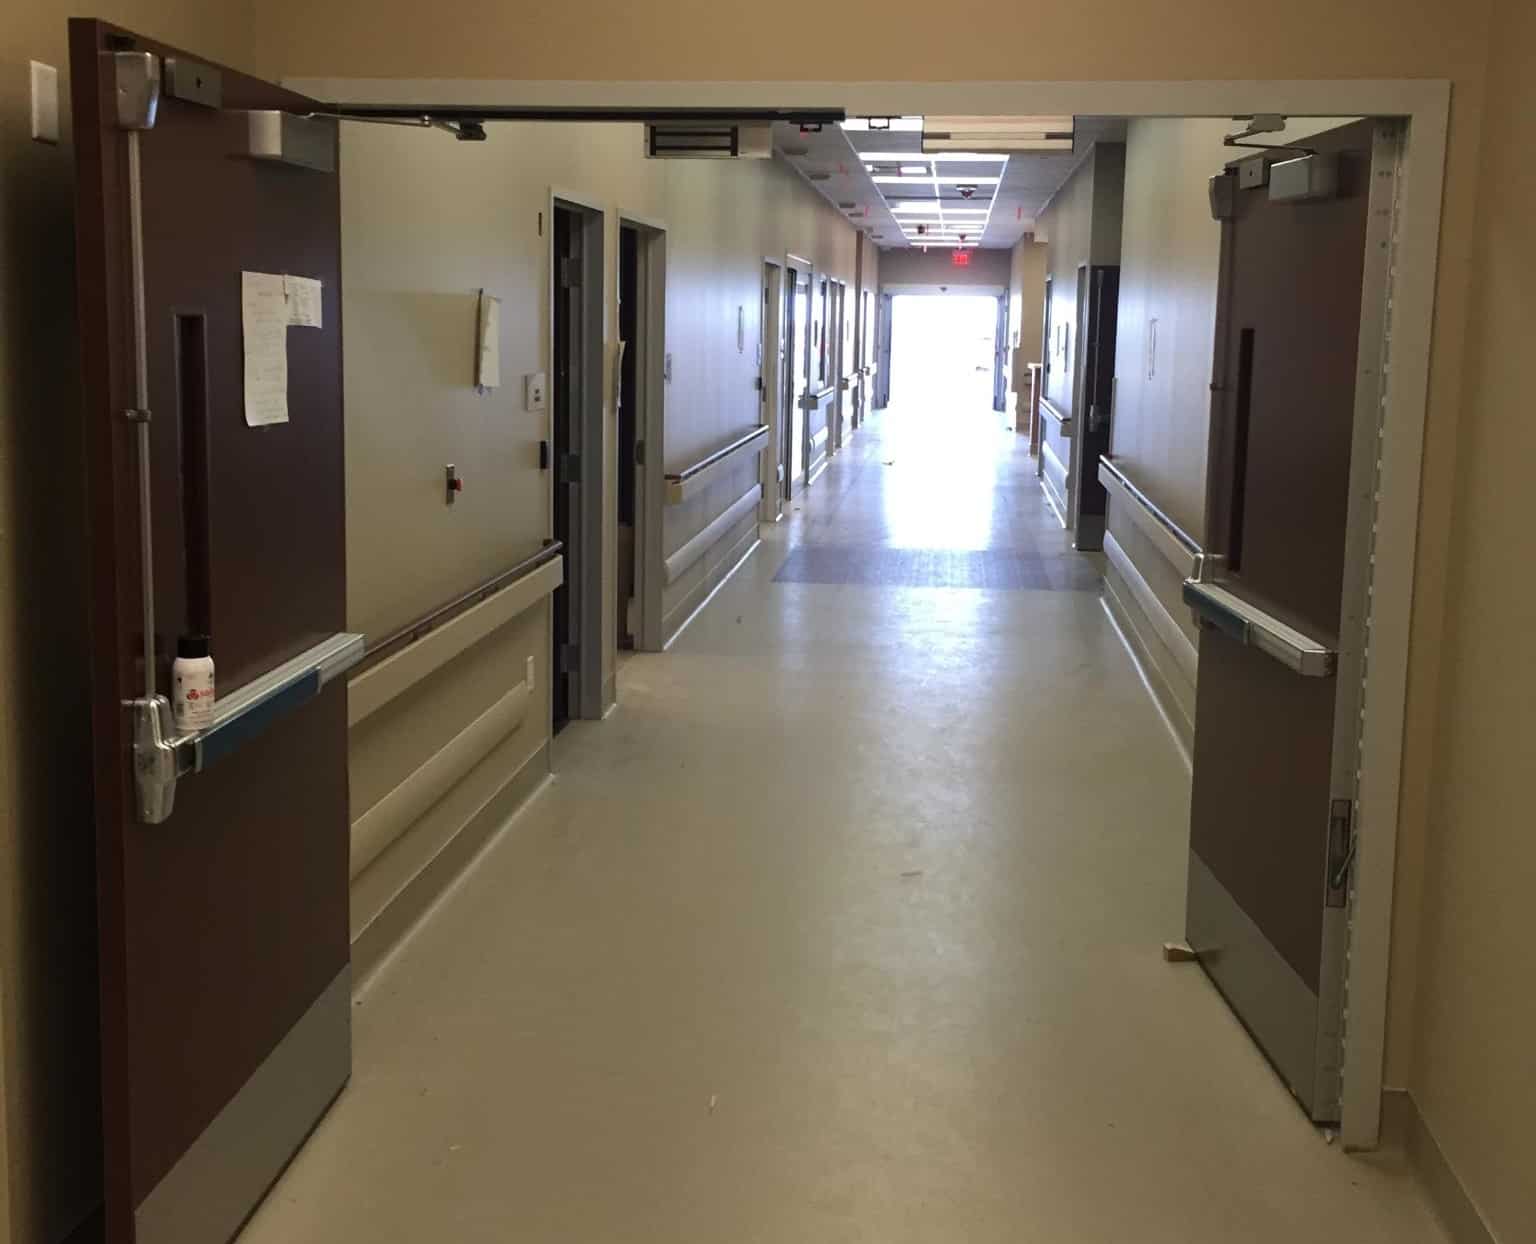 Hospital Fire-Rated Doors